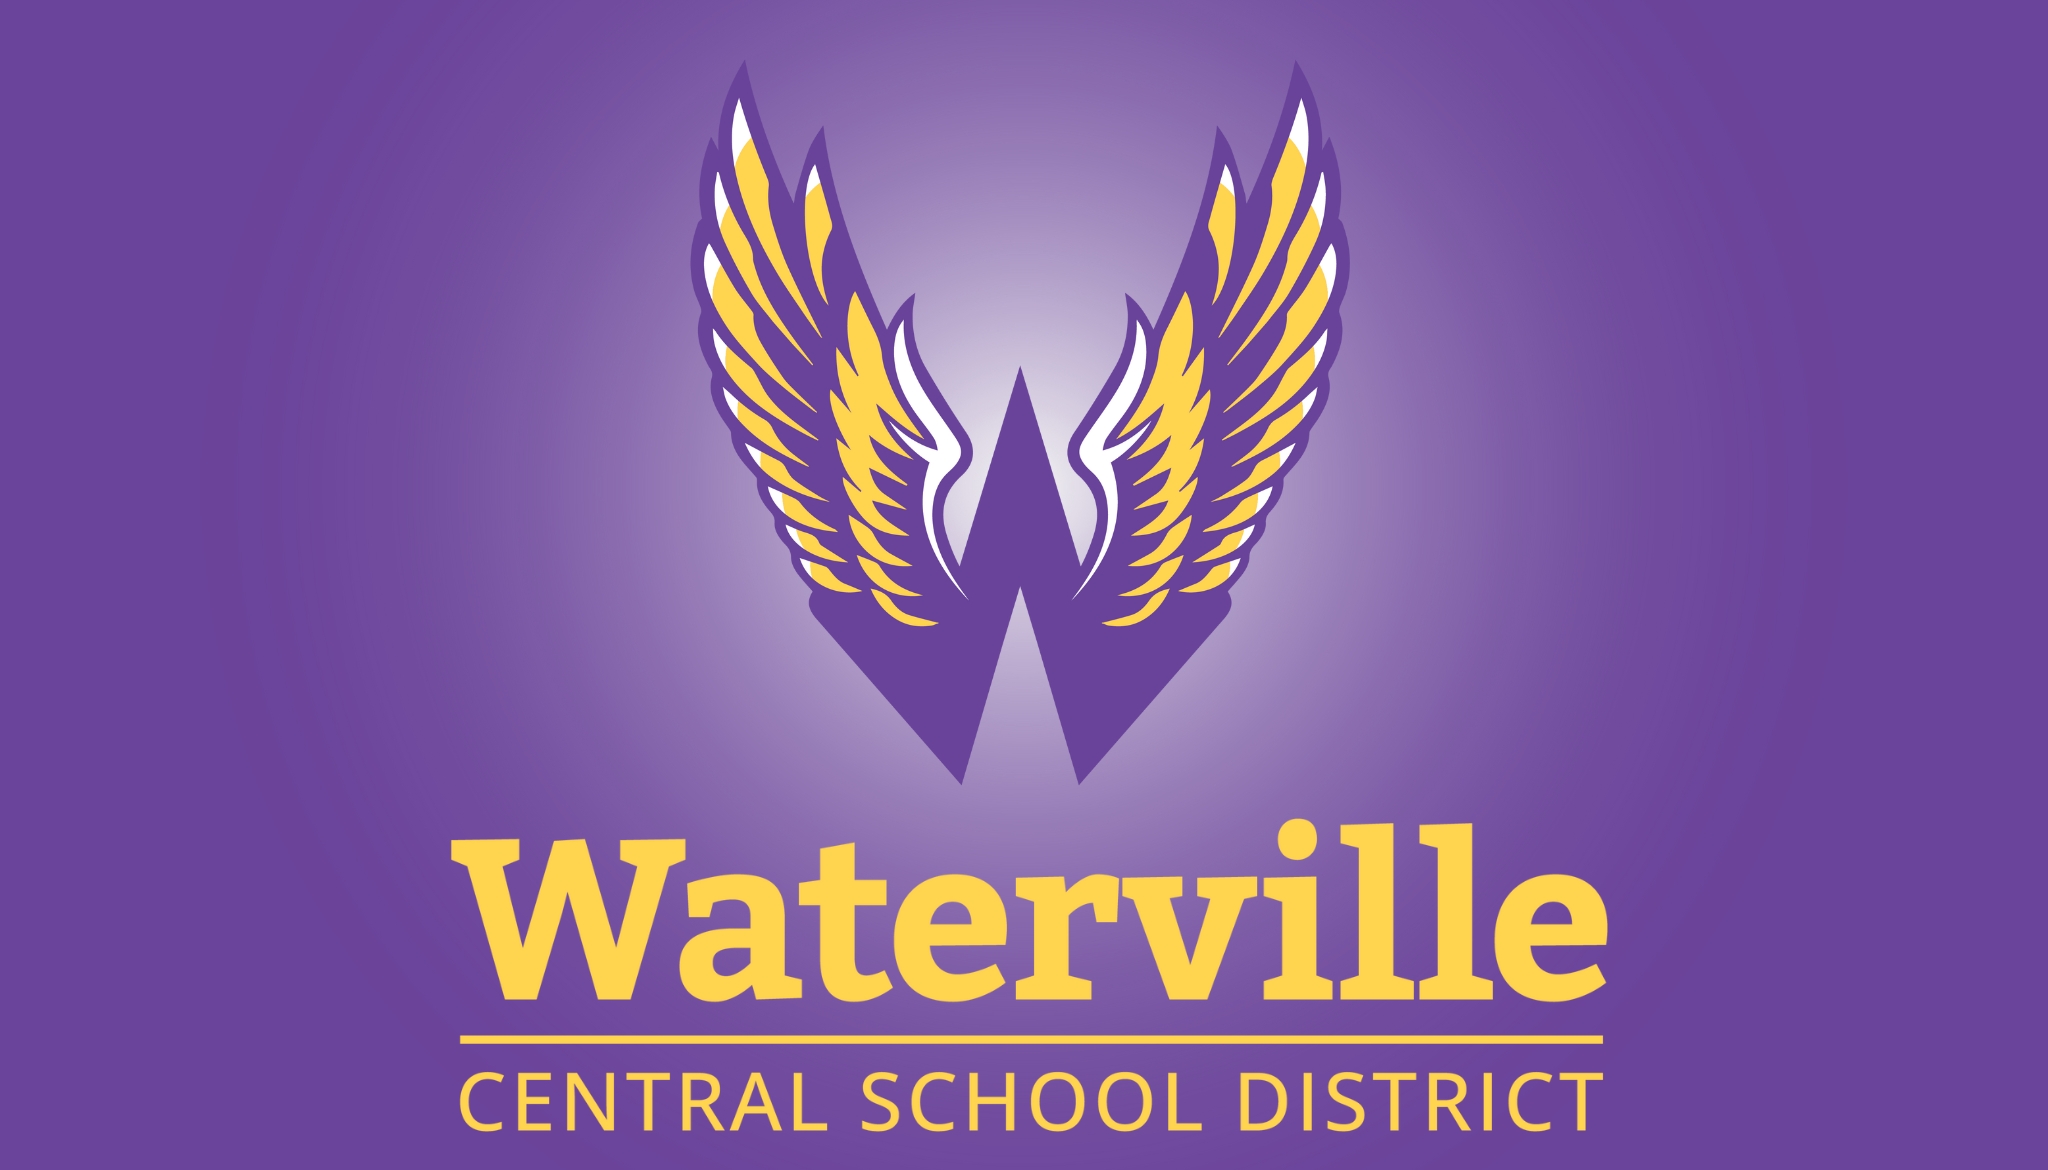 The Waterville Central School District in text underneath a winged W logo.